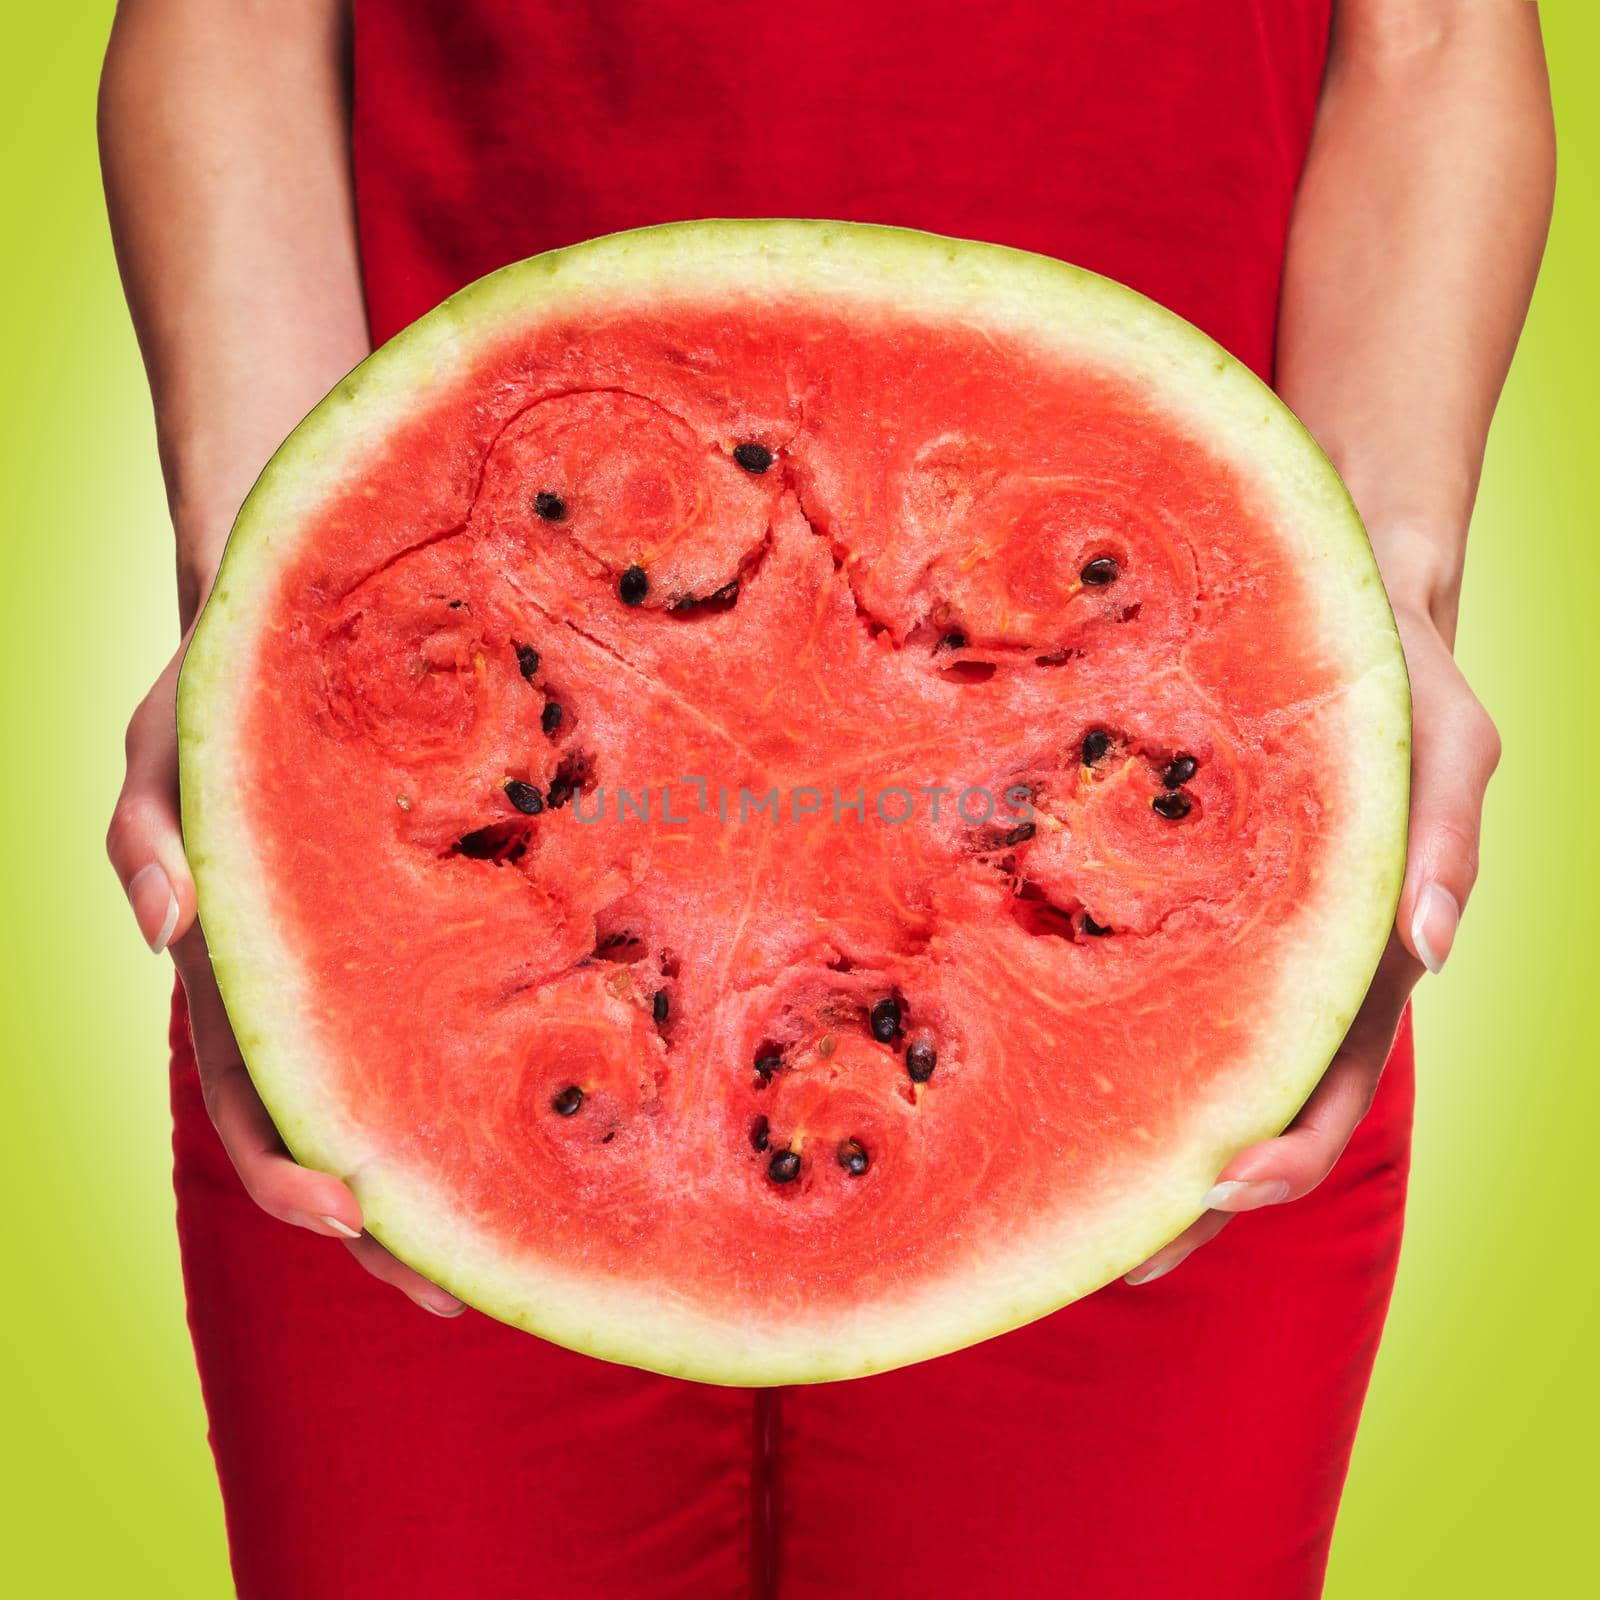 Woman holding a half of juicy watermelon on green background